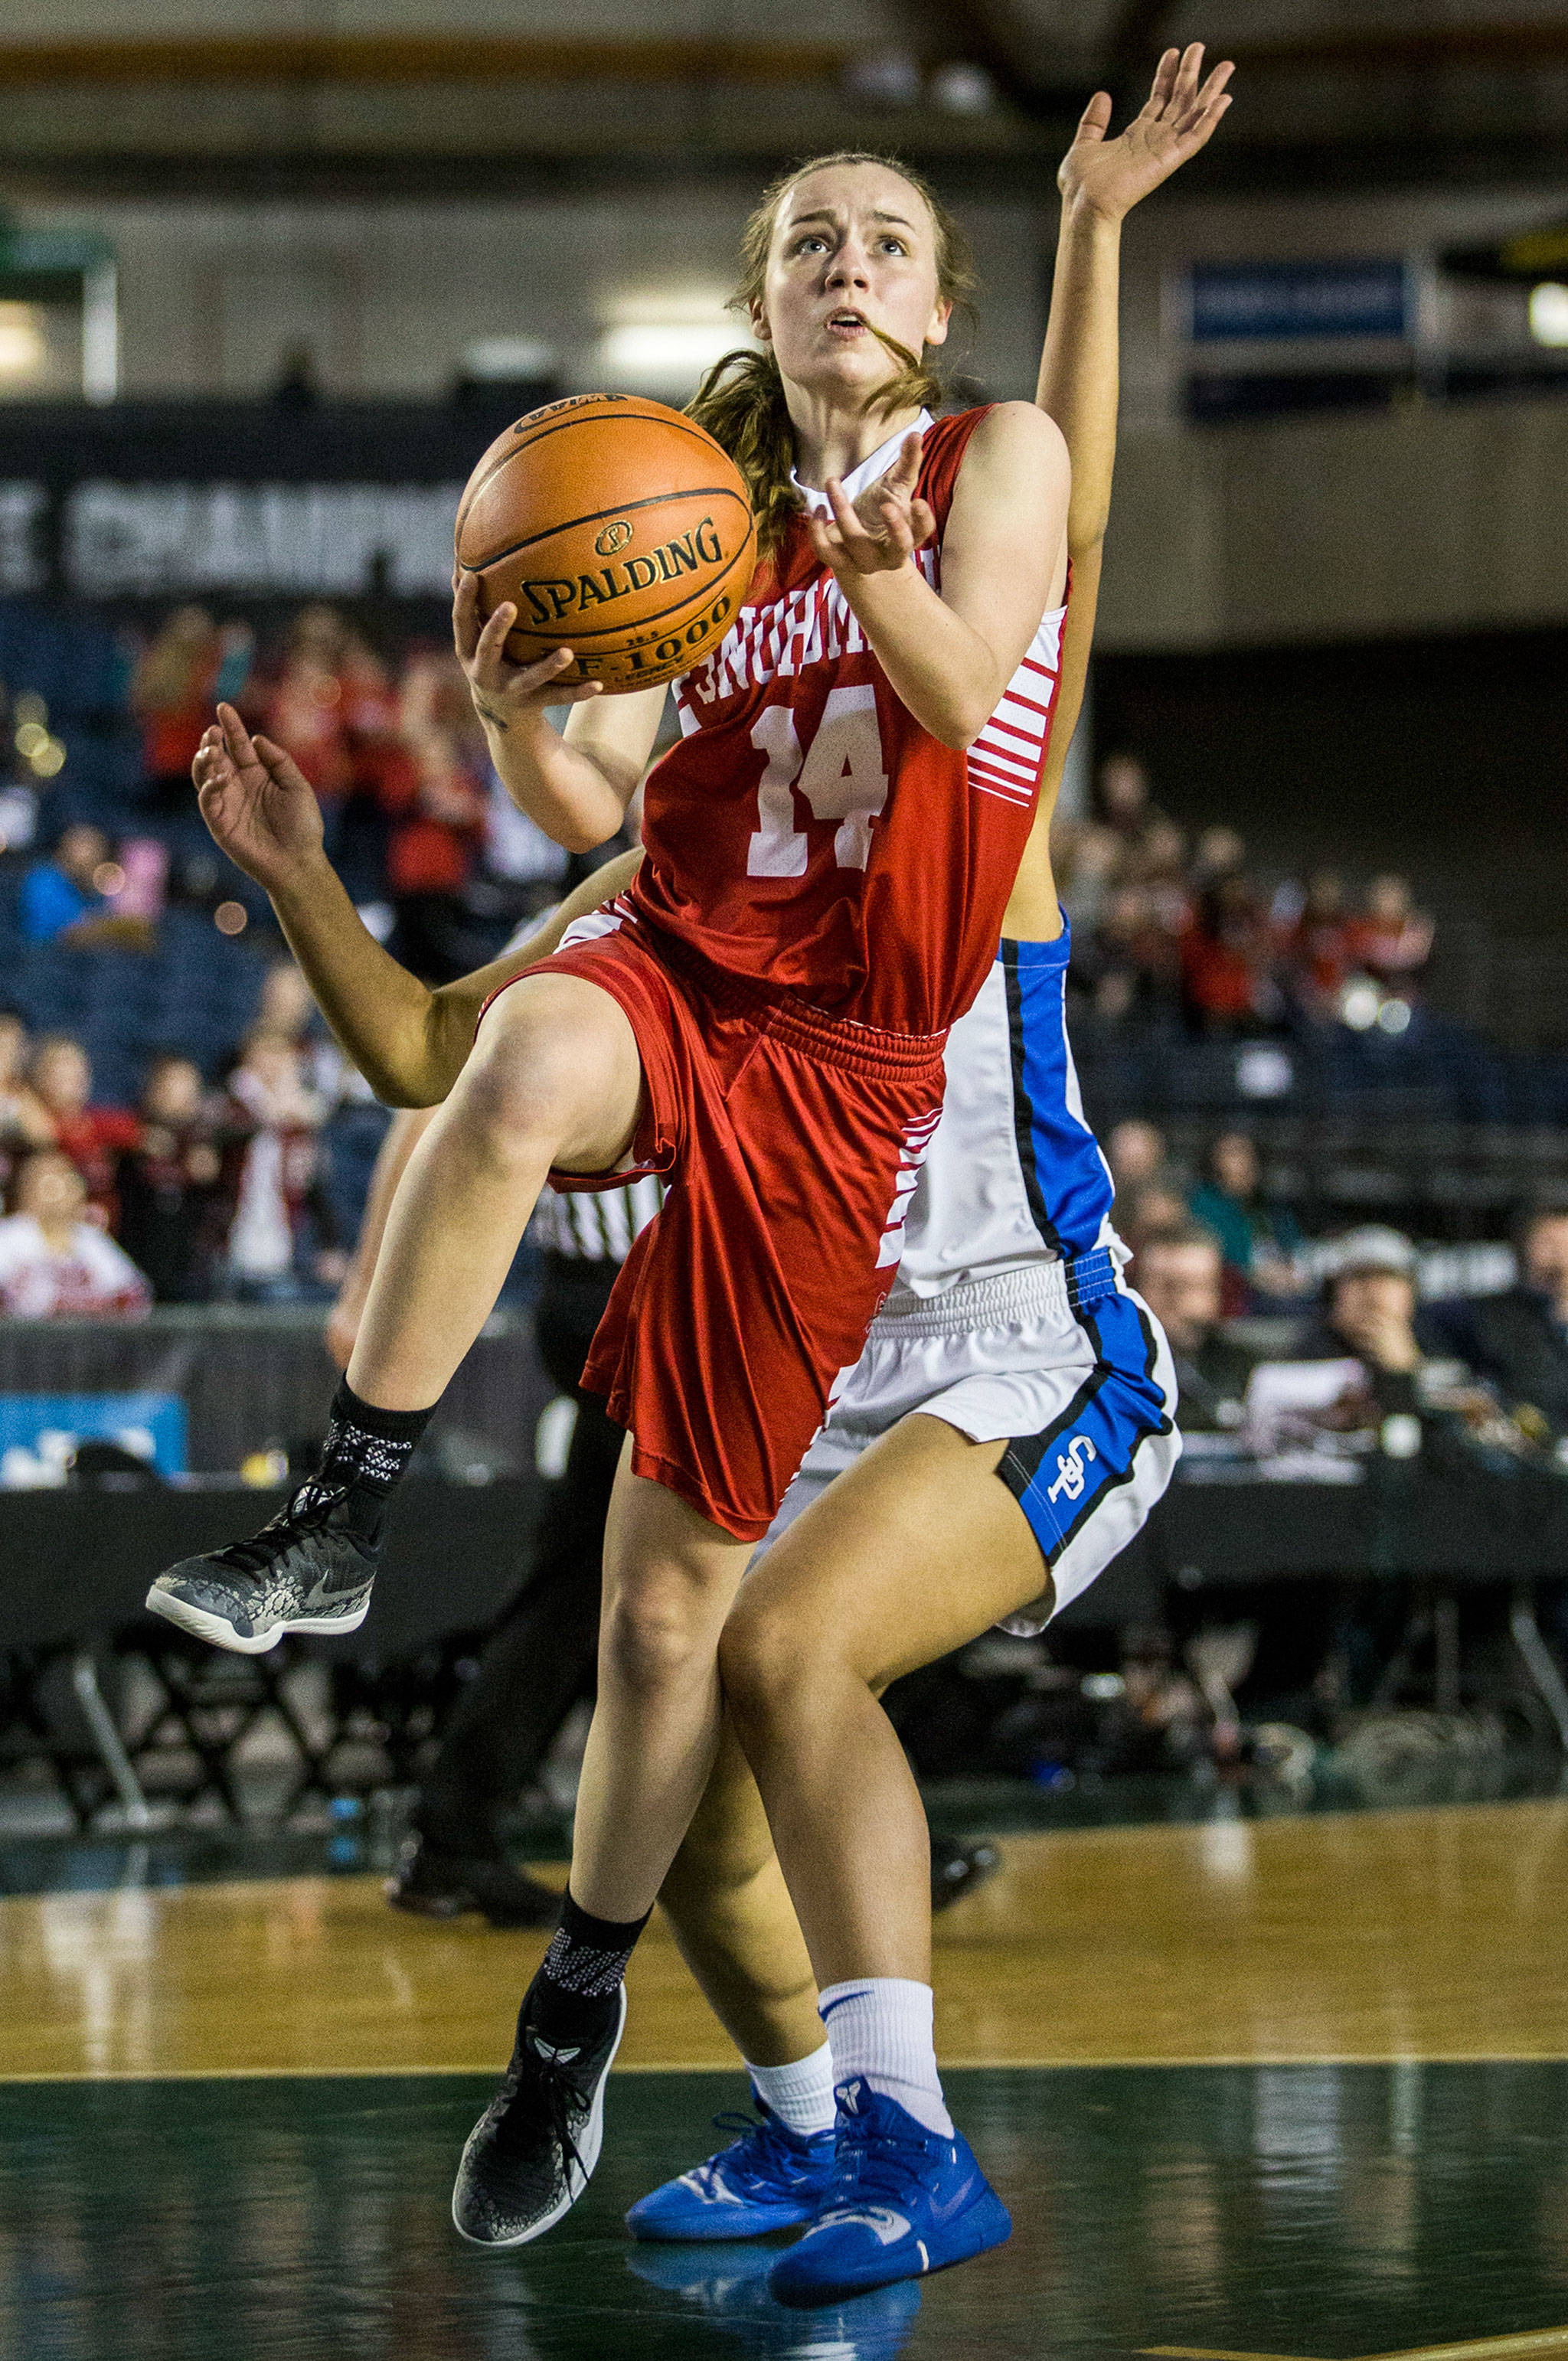 Snohomish’s Maya DuChesne drives to the hoop during the game against Seattle Prep at the 3A Girls Hardwood Classic on Wednesday, Feb. 27, 2019 in Tacoma, Wash. (Olivia Vanni / The Herald)